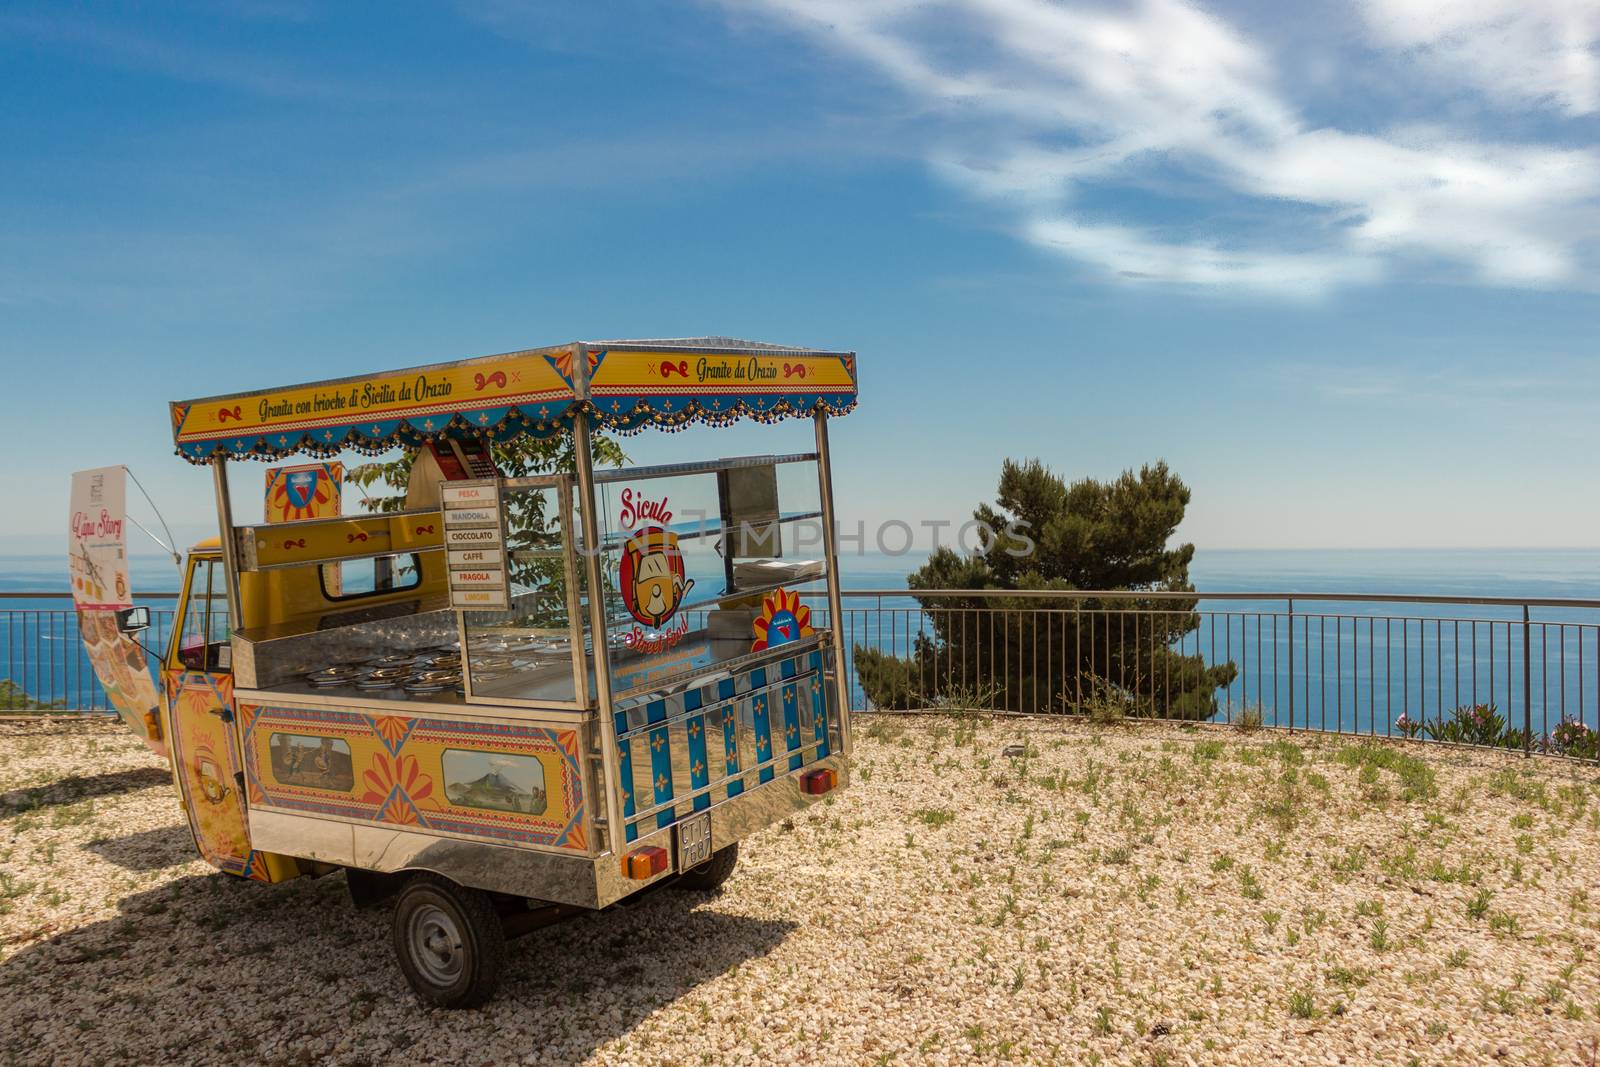 ACIREALE, ITALY - May 31, 2015: The traditional Italian apecar on the road. Ice cream served by small trucks around the streets.